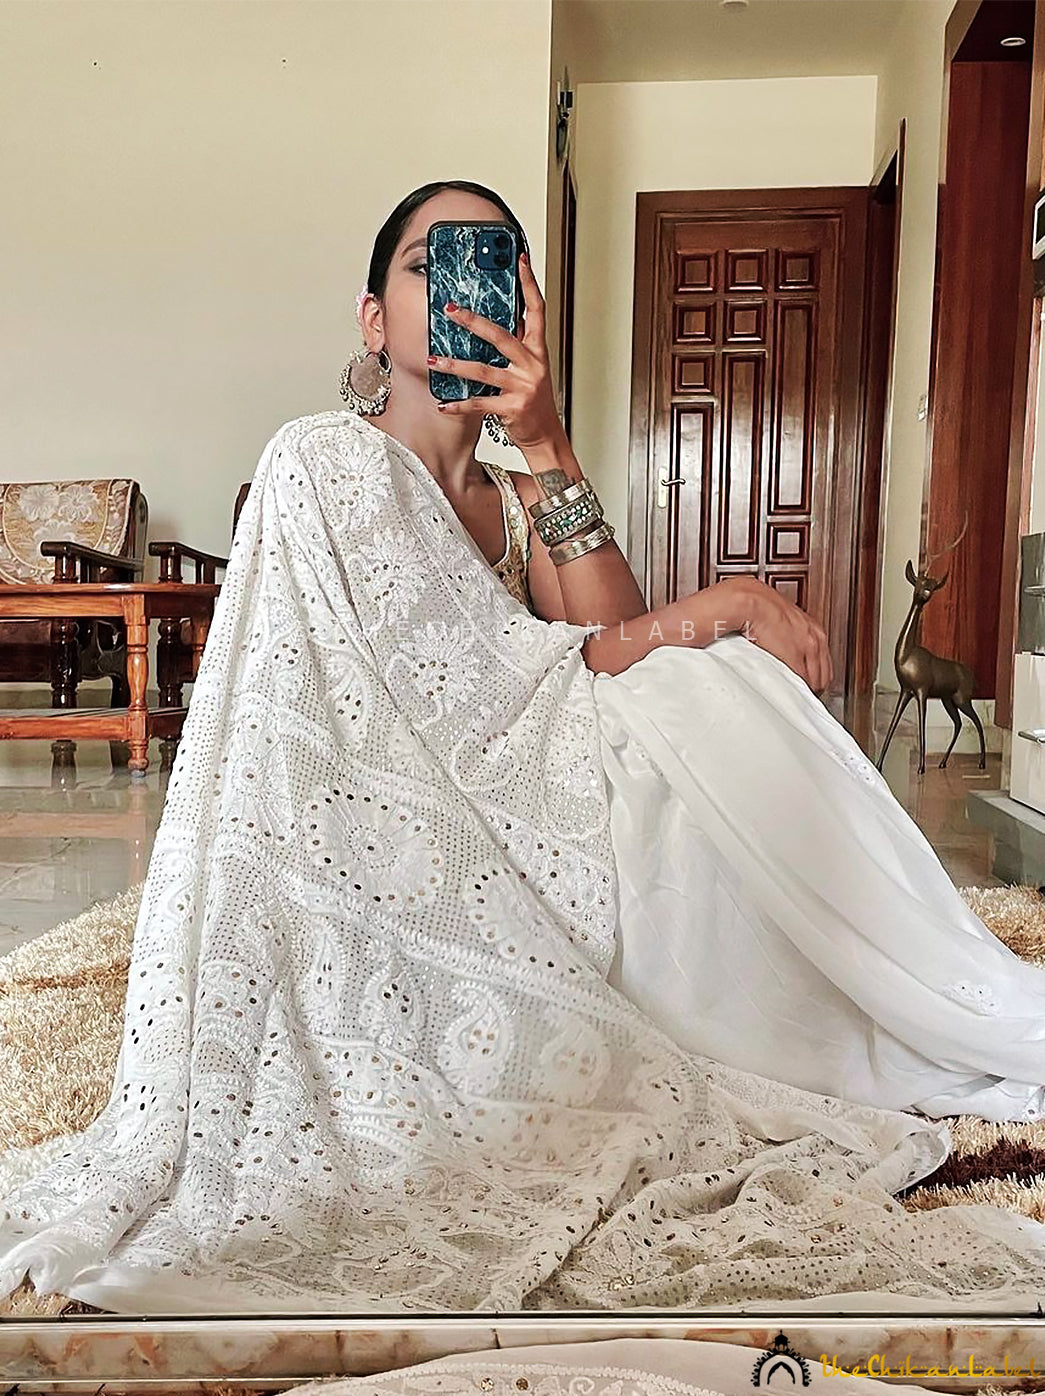 Sneha Reddy's magnificient look in an ivory organza saree for a wedding!